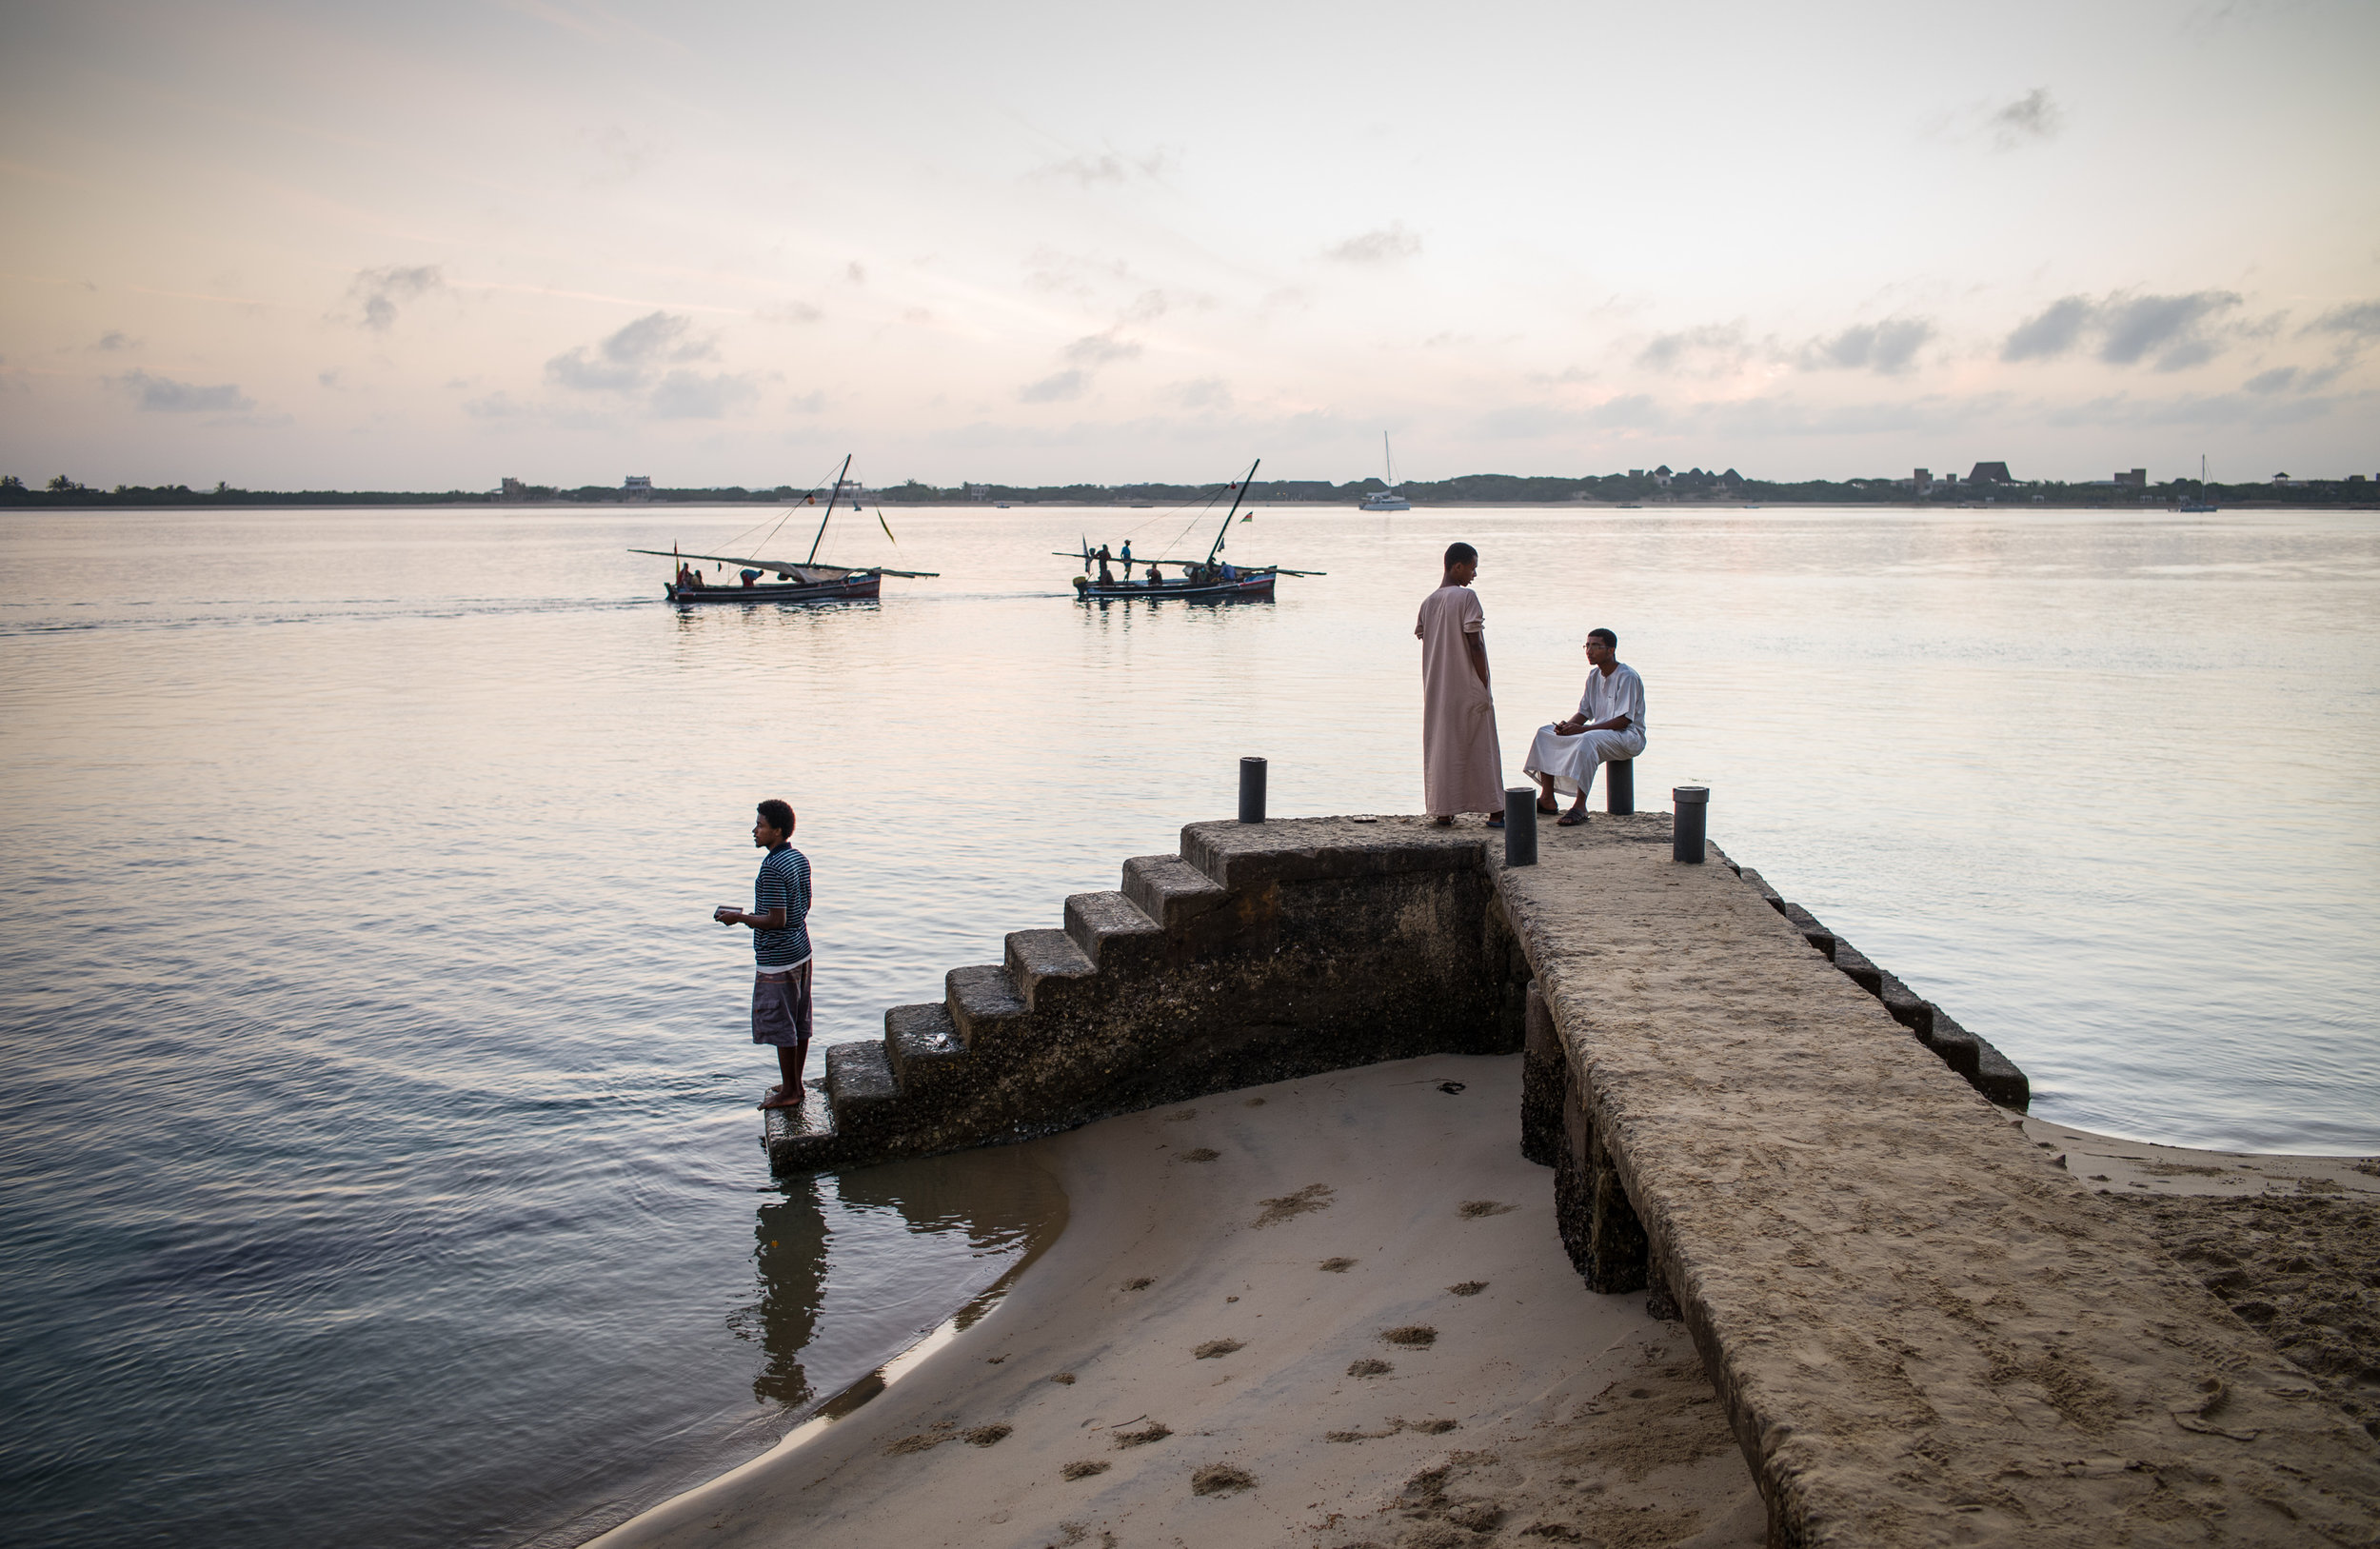 Young men linger on Shella pier on Lamu Island in Kenya as fishermen head out to sea aboard their jahazis – a type of dhow sailing vessel